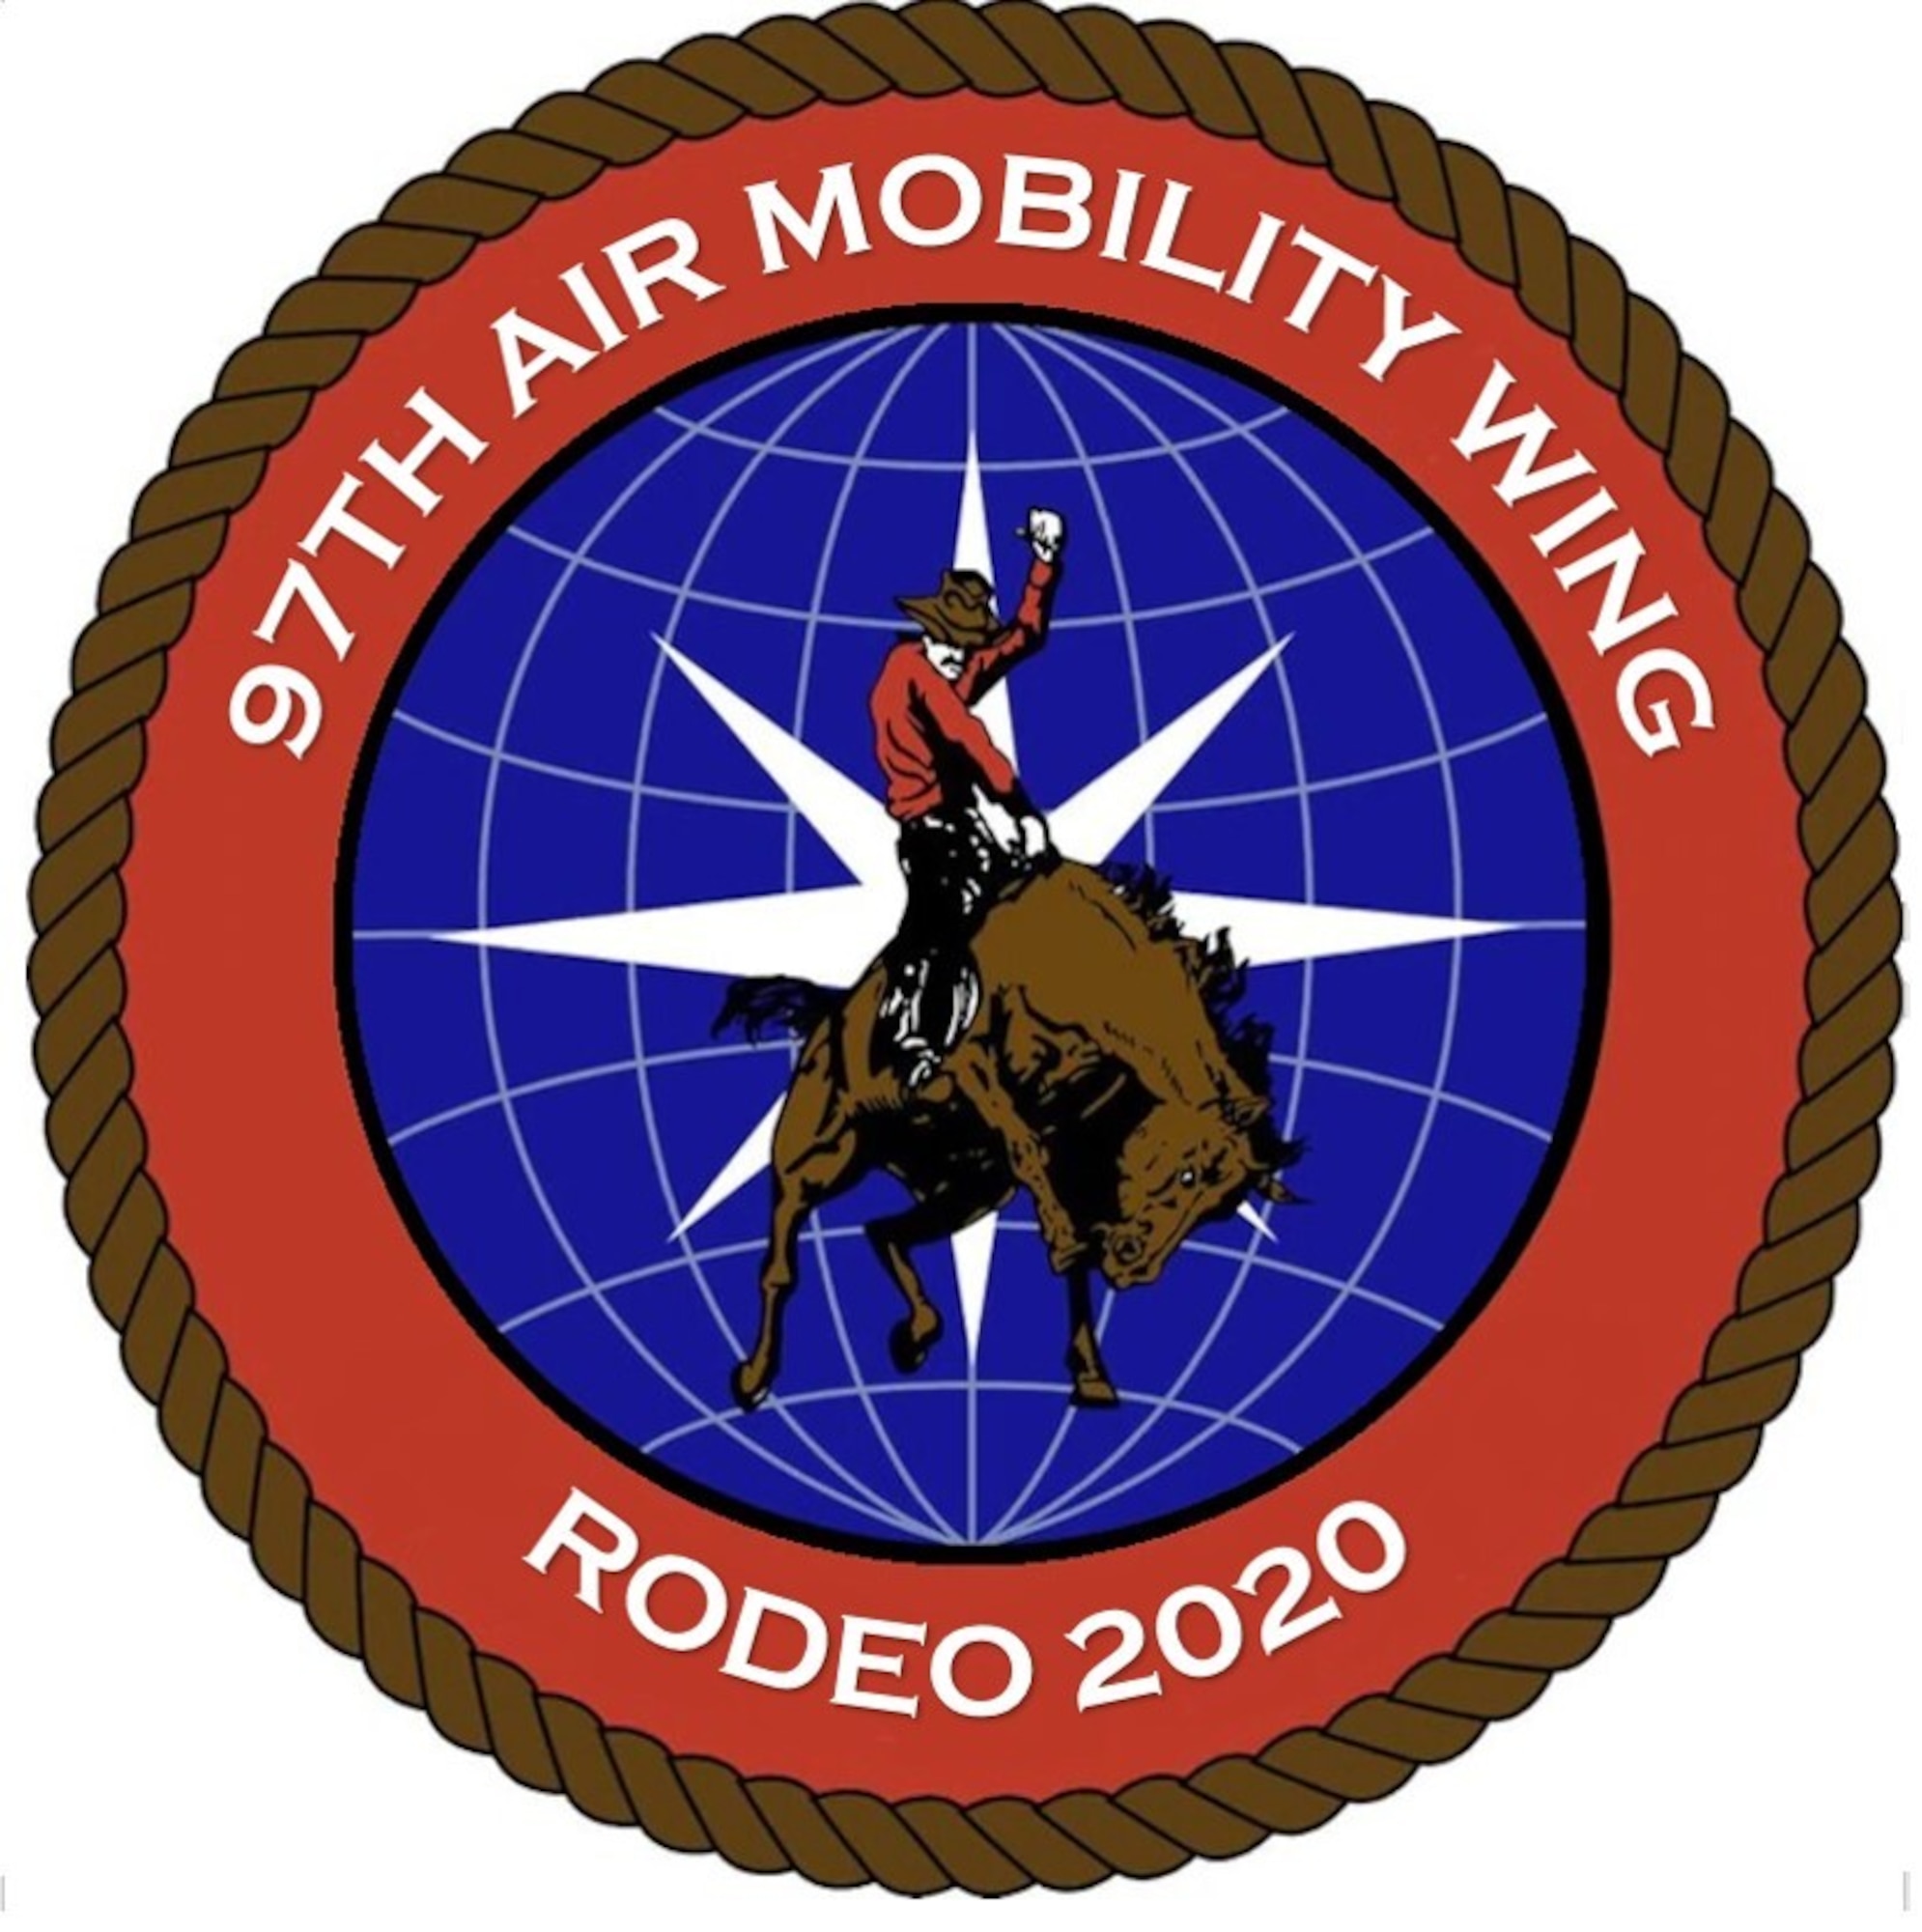 97th Air Mobility Wing Flying Rodeo.